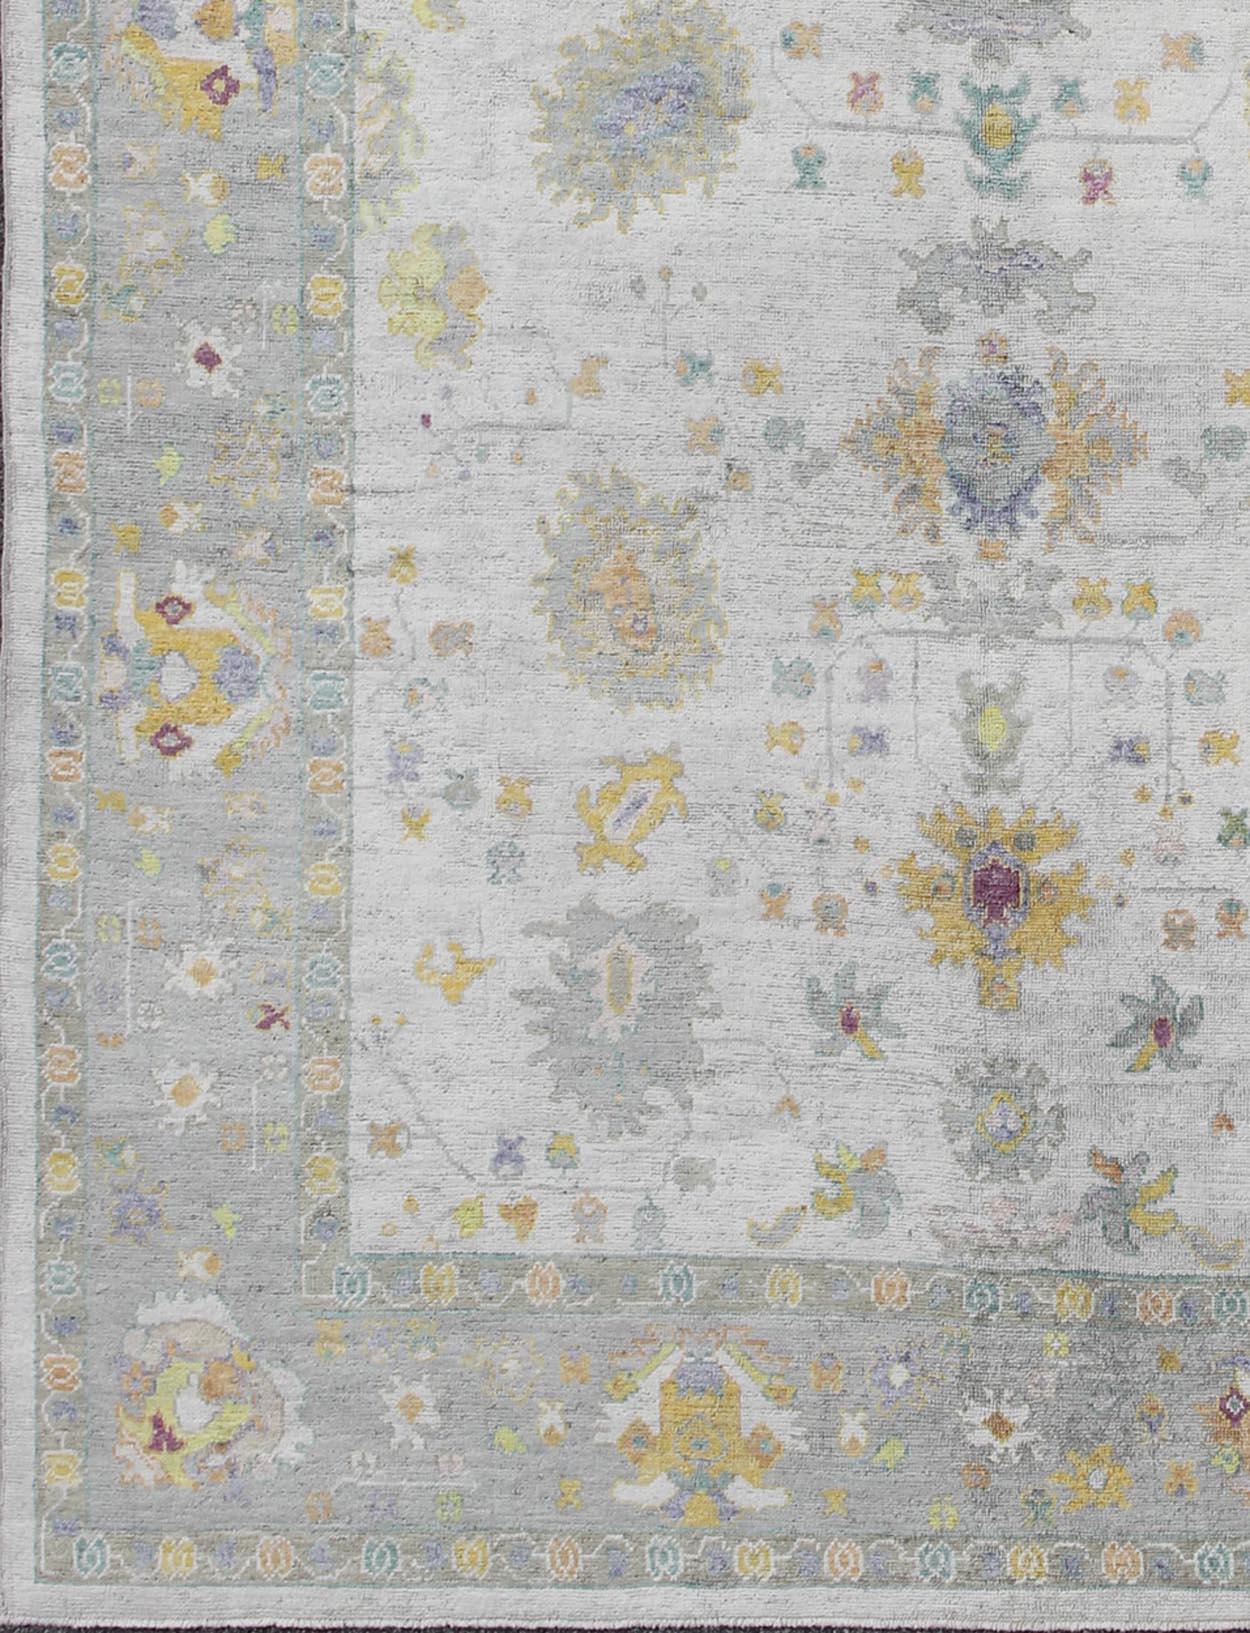 Large Turkish Oushak rug with neutral color palette and all-over flower design. Keivan Woven Arts / rug EN-165632, country of origin / type: Turkey / Oushak. 

Measures: 10'2 x 14'.

This Classic design Oushak rug from Turkey features a subdued,